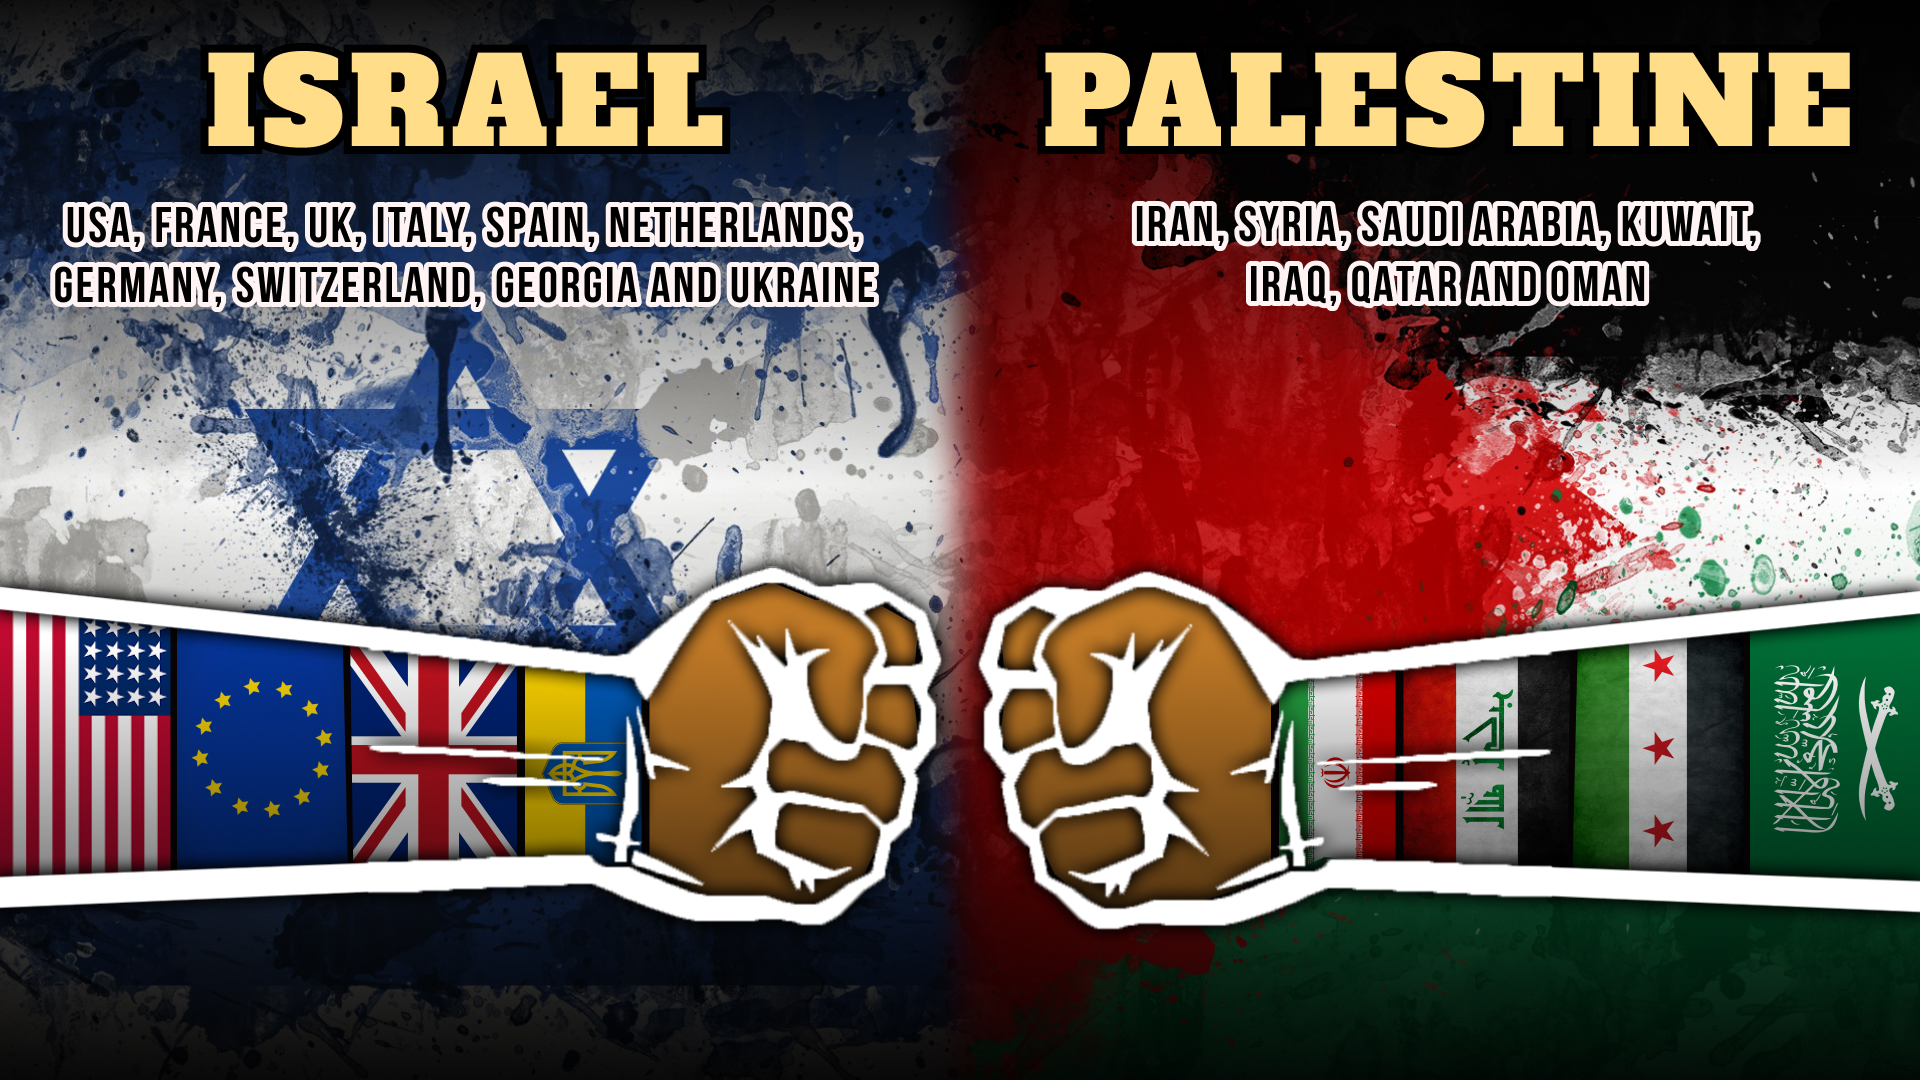 Israel-Palestine conflict who is supports who?